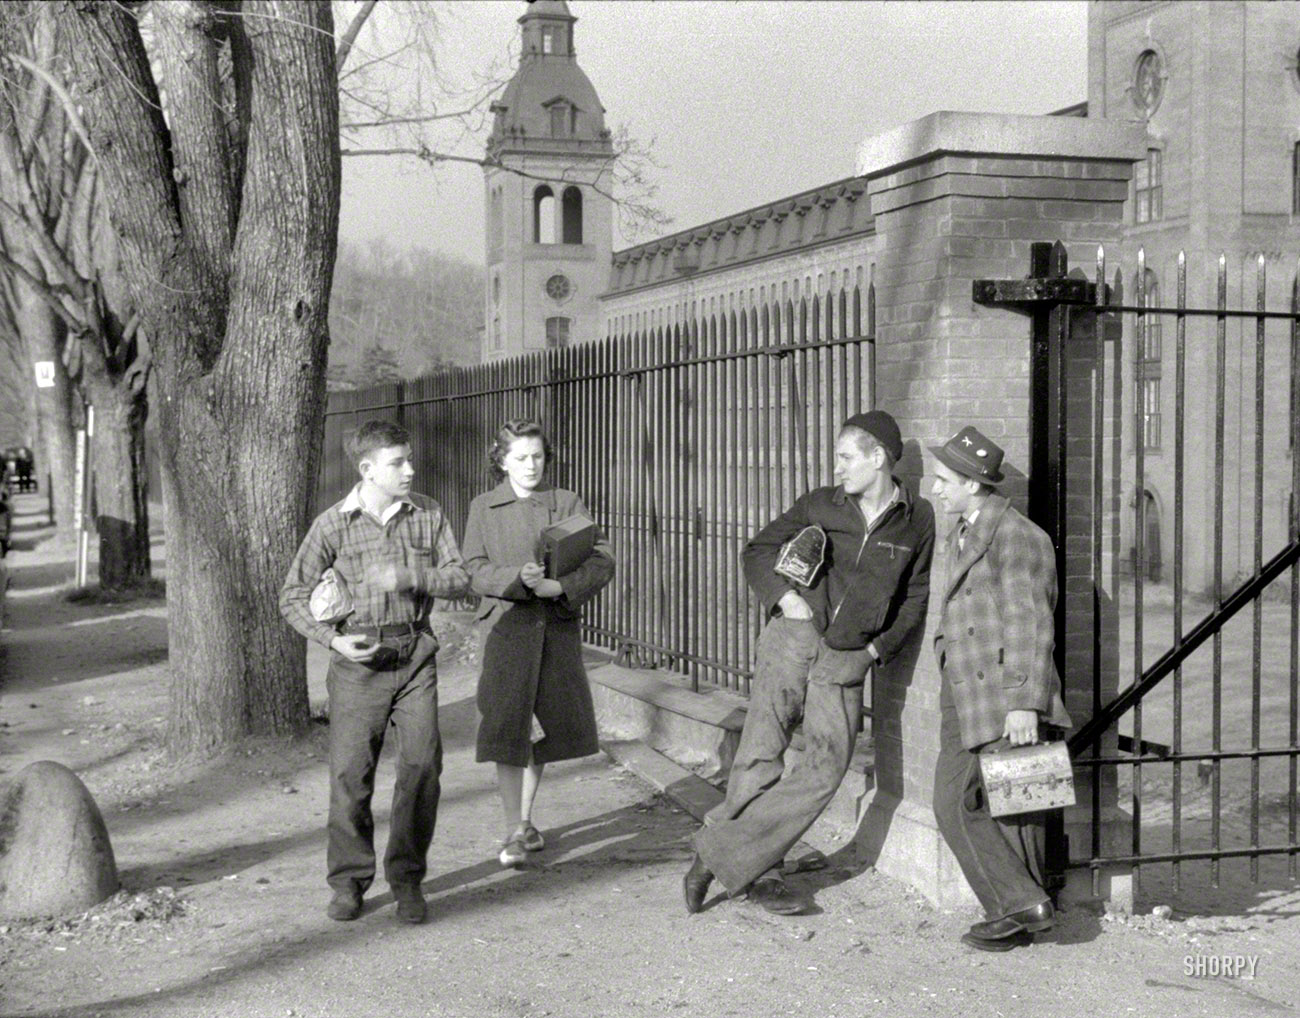 November 1940. "Young workers at the Penomah Mills Inc., Taftville, Conn." Brown-bagger meets the lunchbox set. (Or, as a commenter on our Facebook page puts it: "I think that's Archie.") Photo by Jack Delano. View full size.